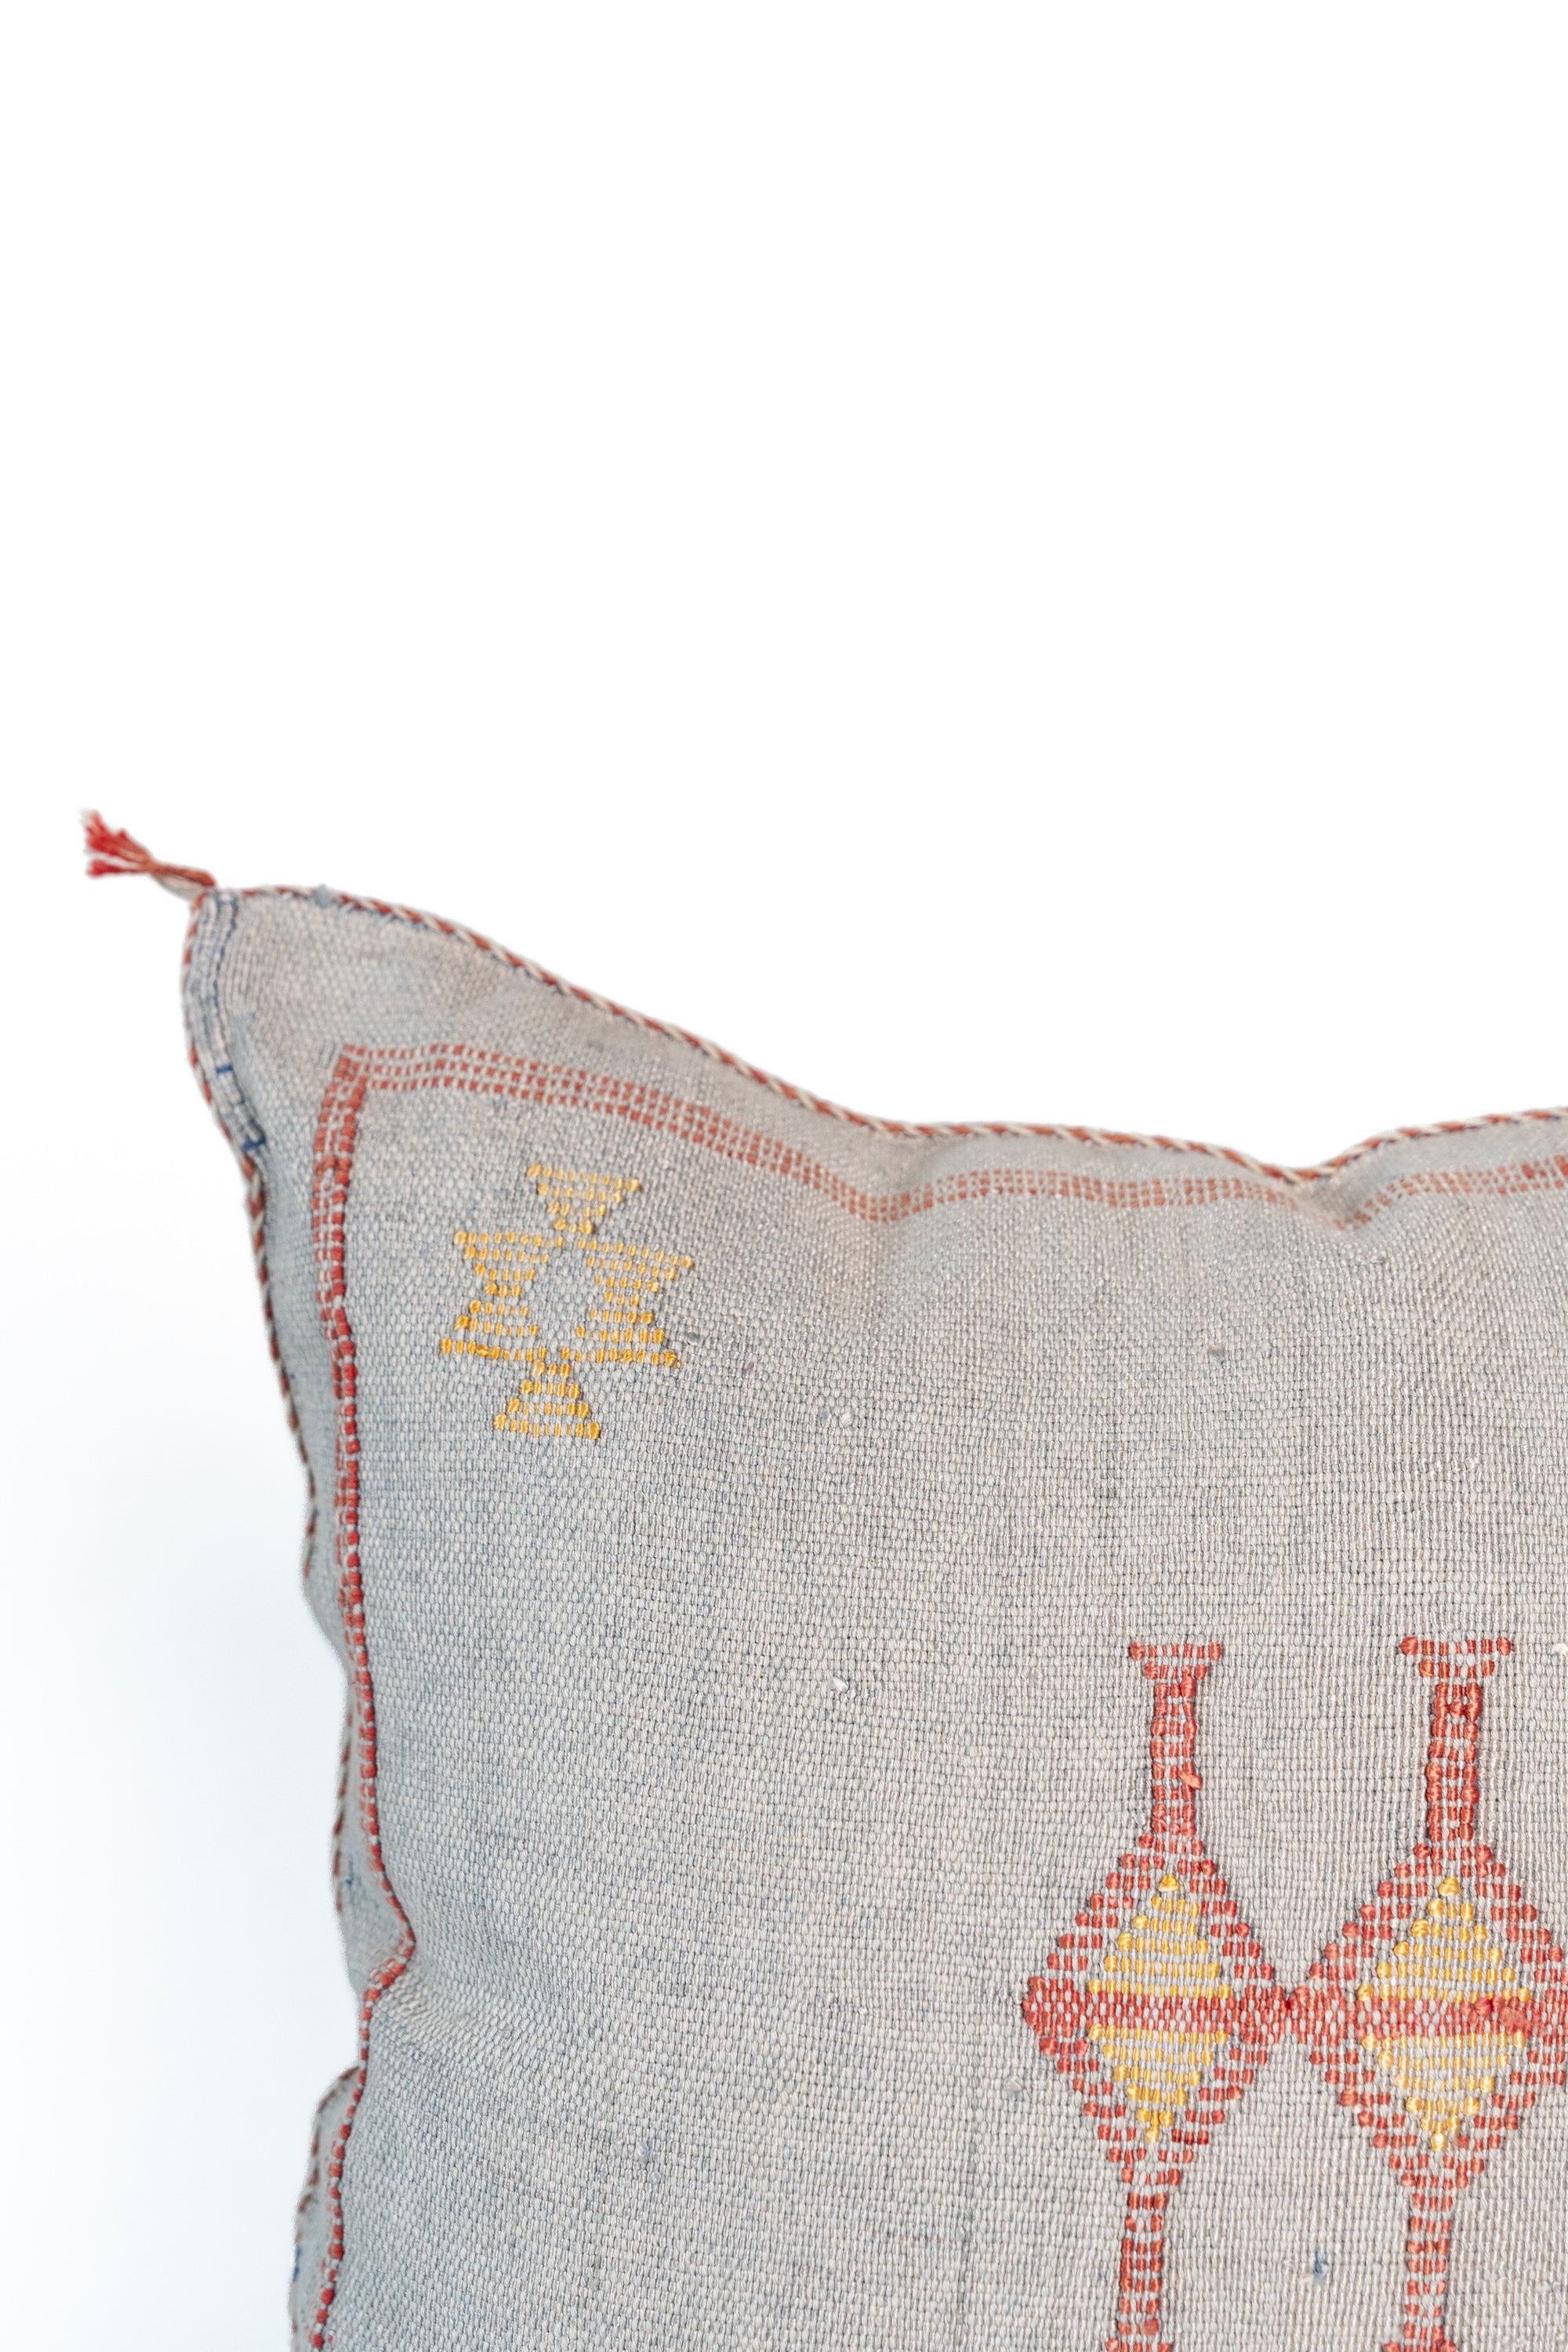 District Loom Pillow Cover No. 1129 for Anthropologie